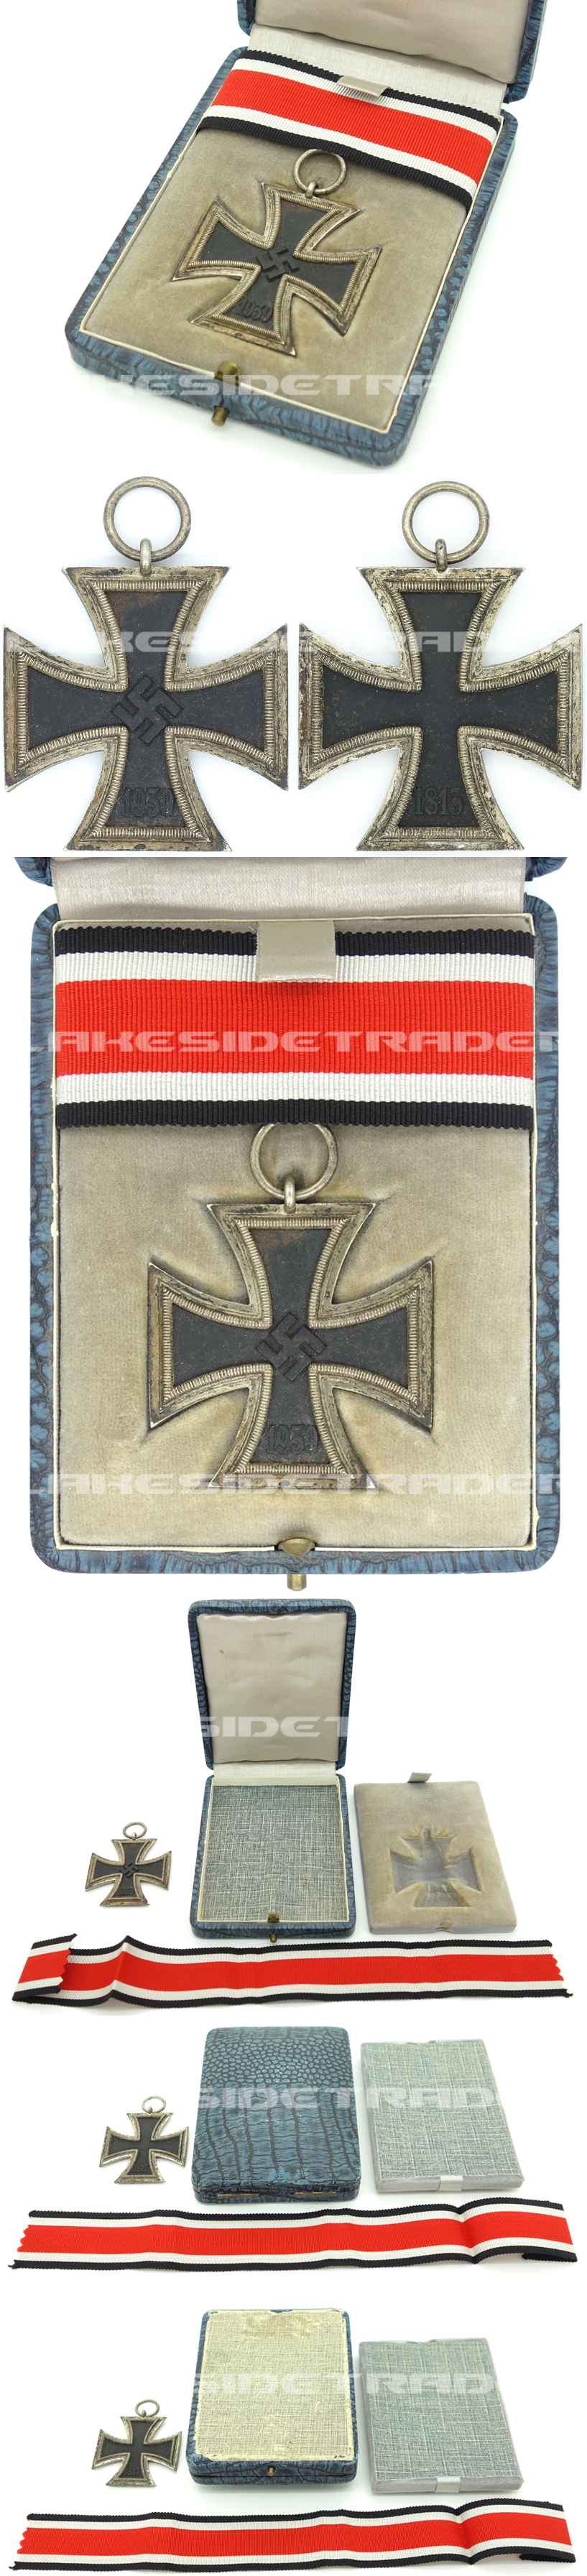 Private Case - 2nd Class Iron Cross